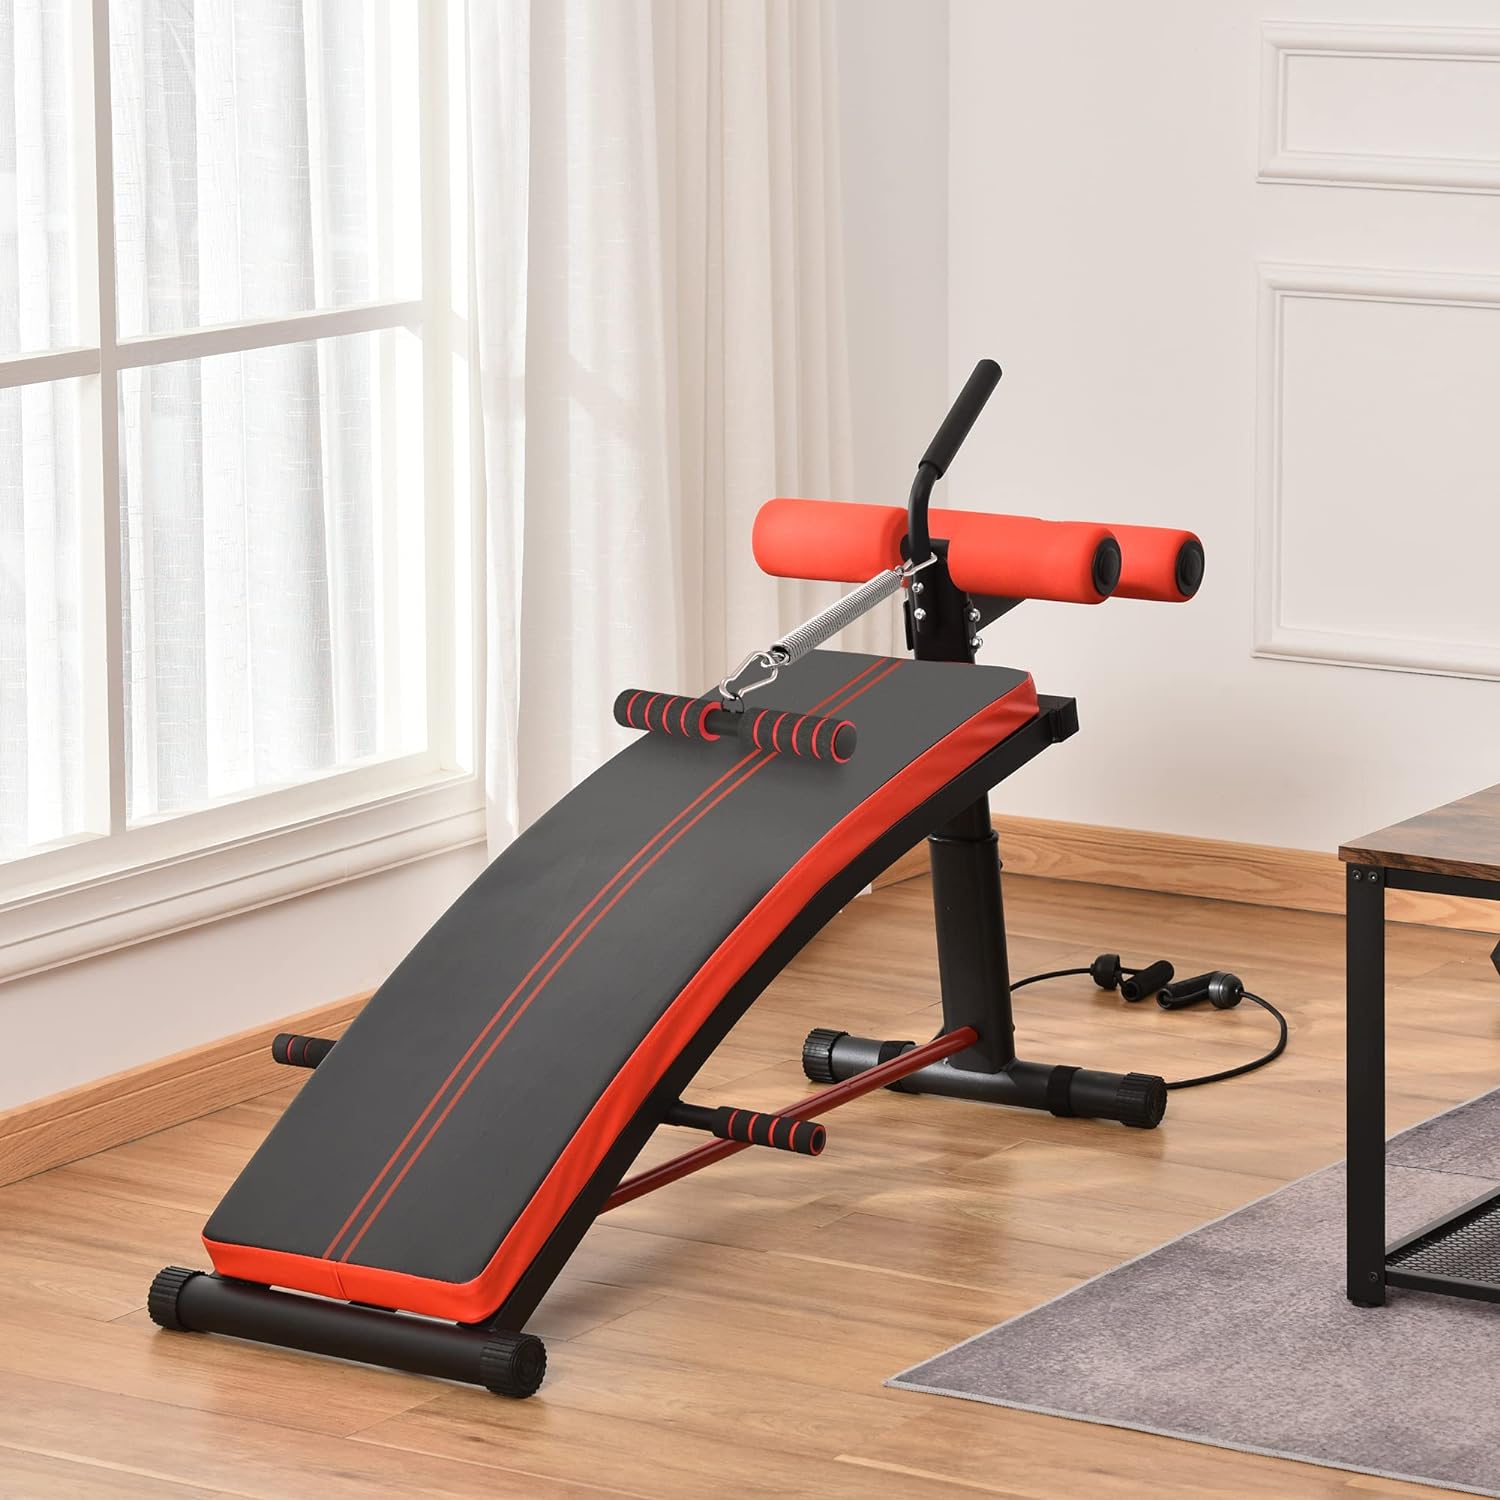 Soozier Sit Up Bench Review